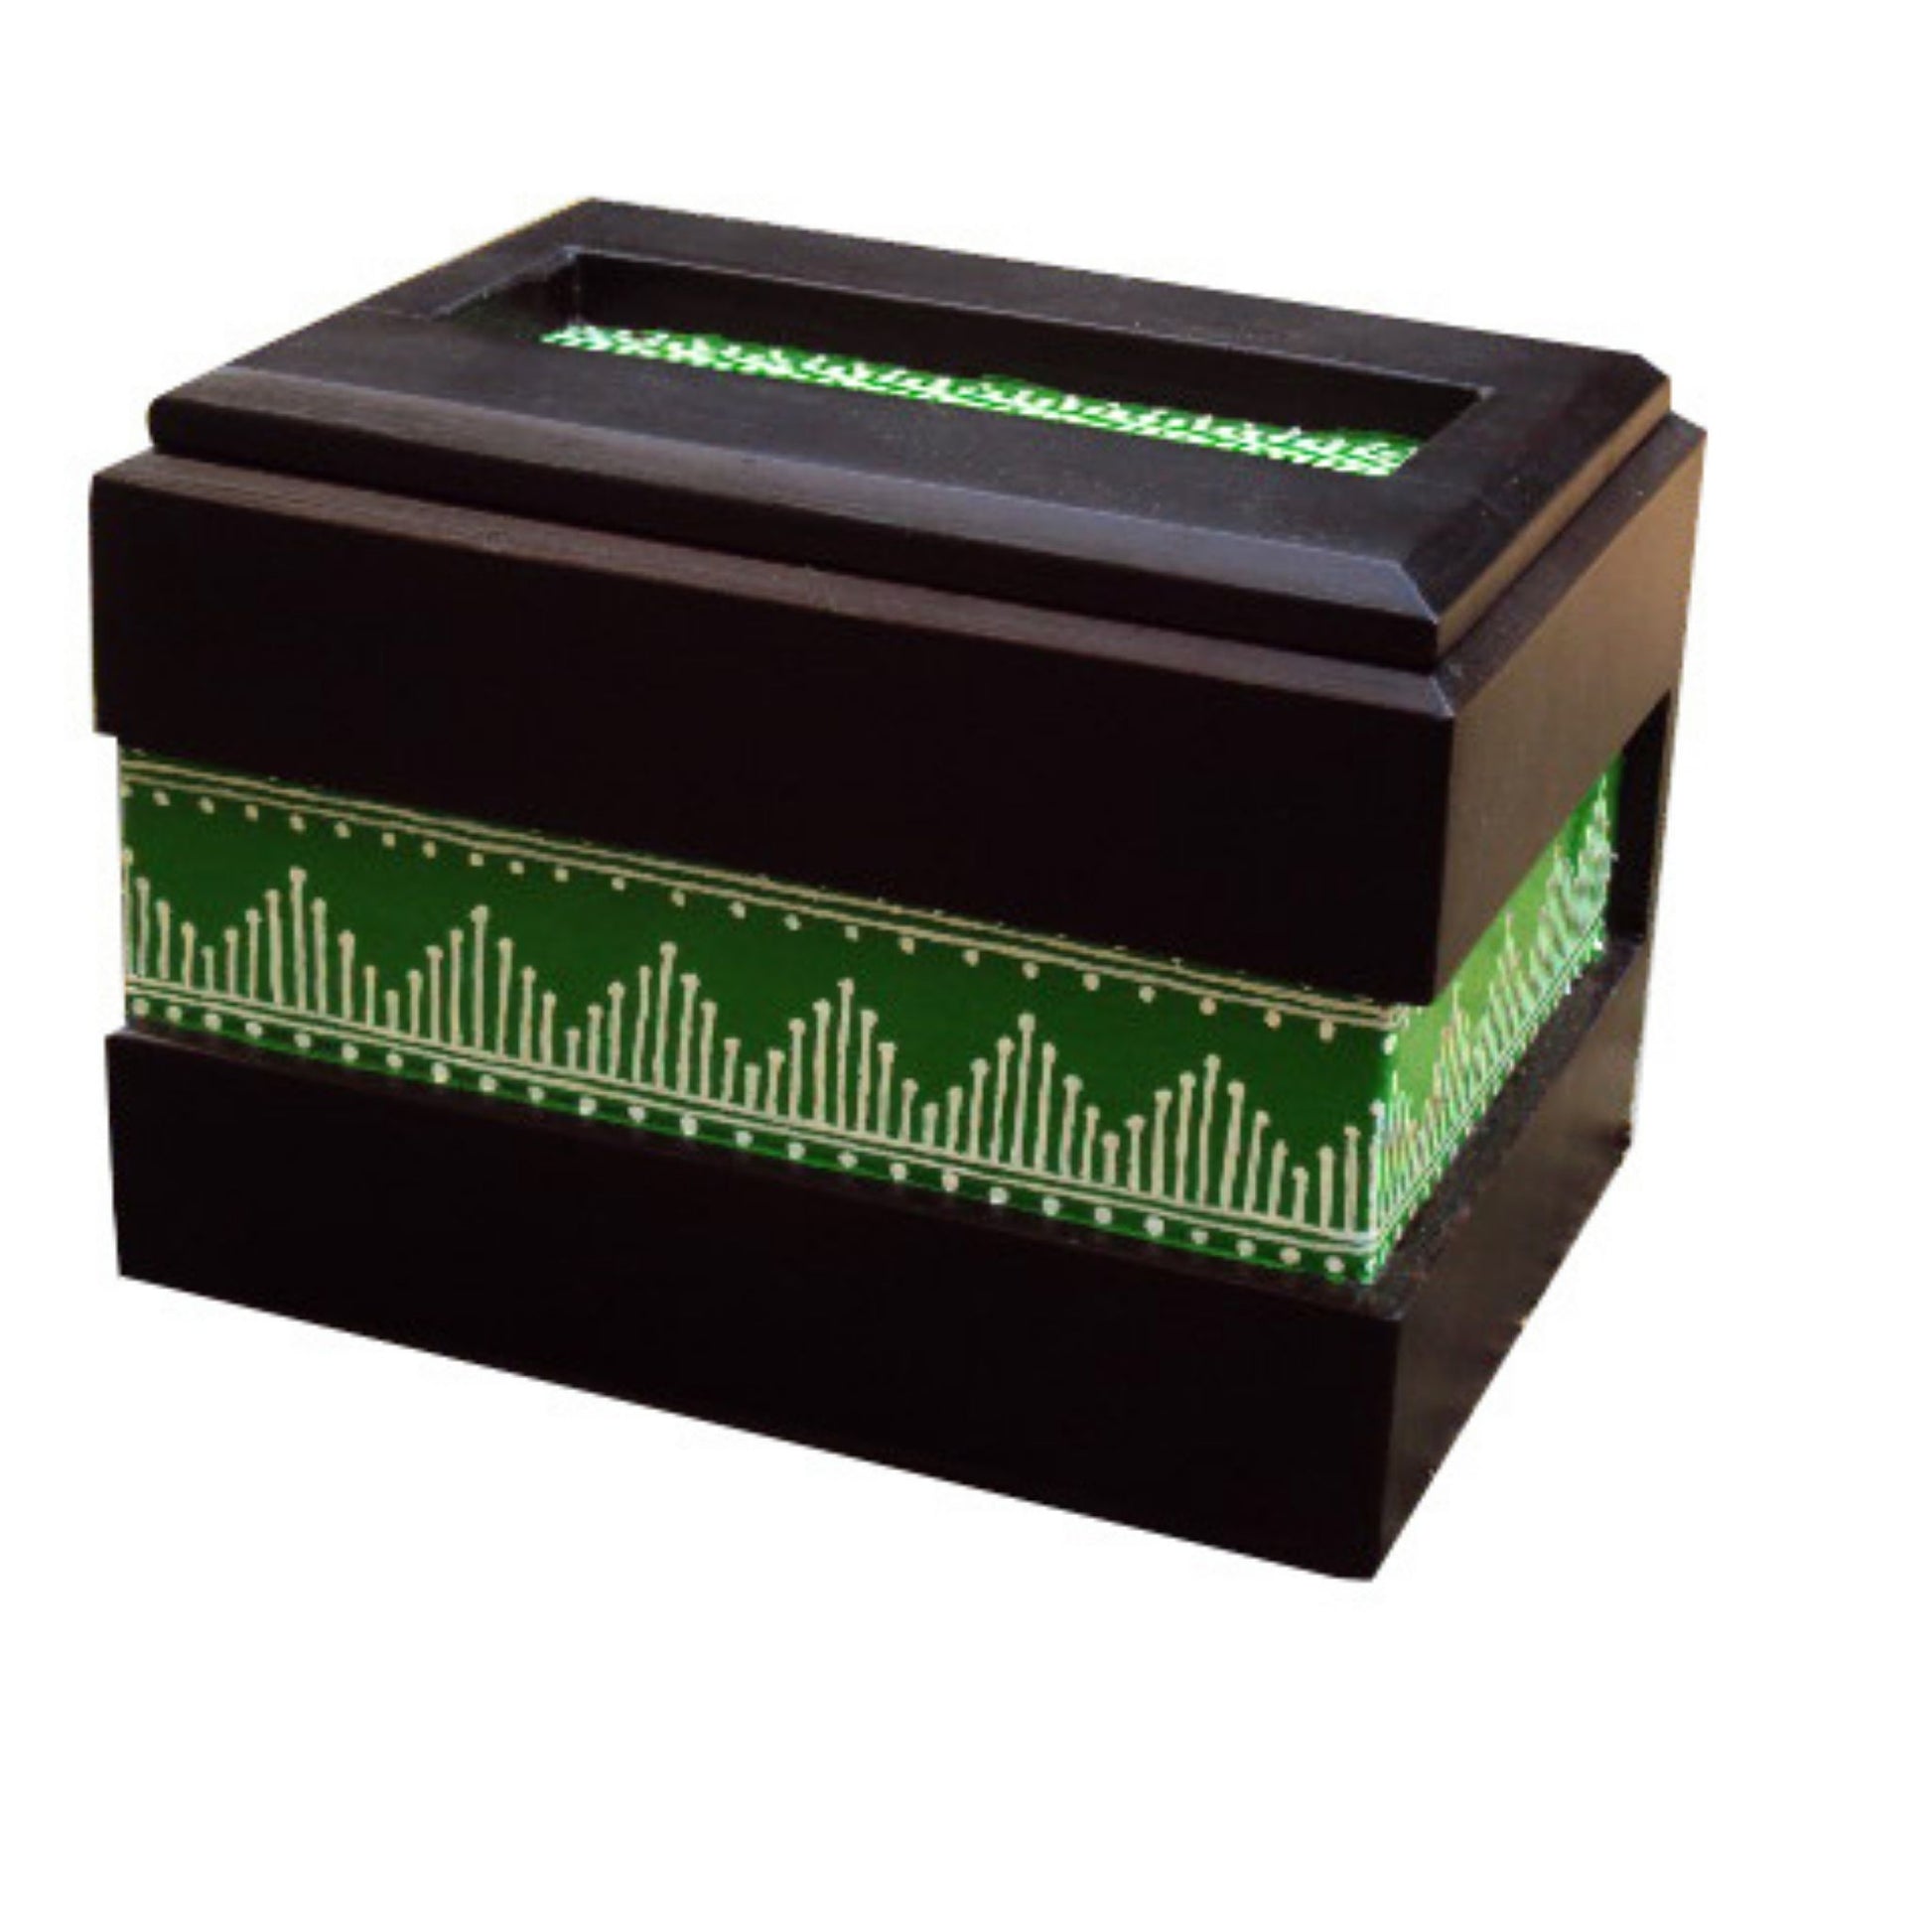 Aiapn Inspired Hand Painted Sal Wood Storage Box Large for Gifting Purposes. Green, white and black colour. 